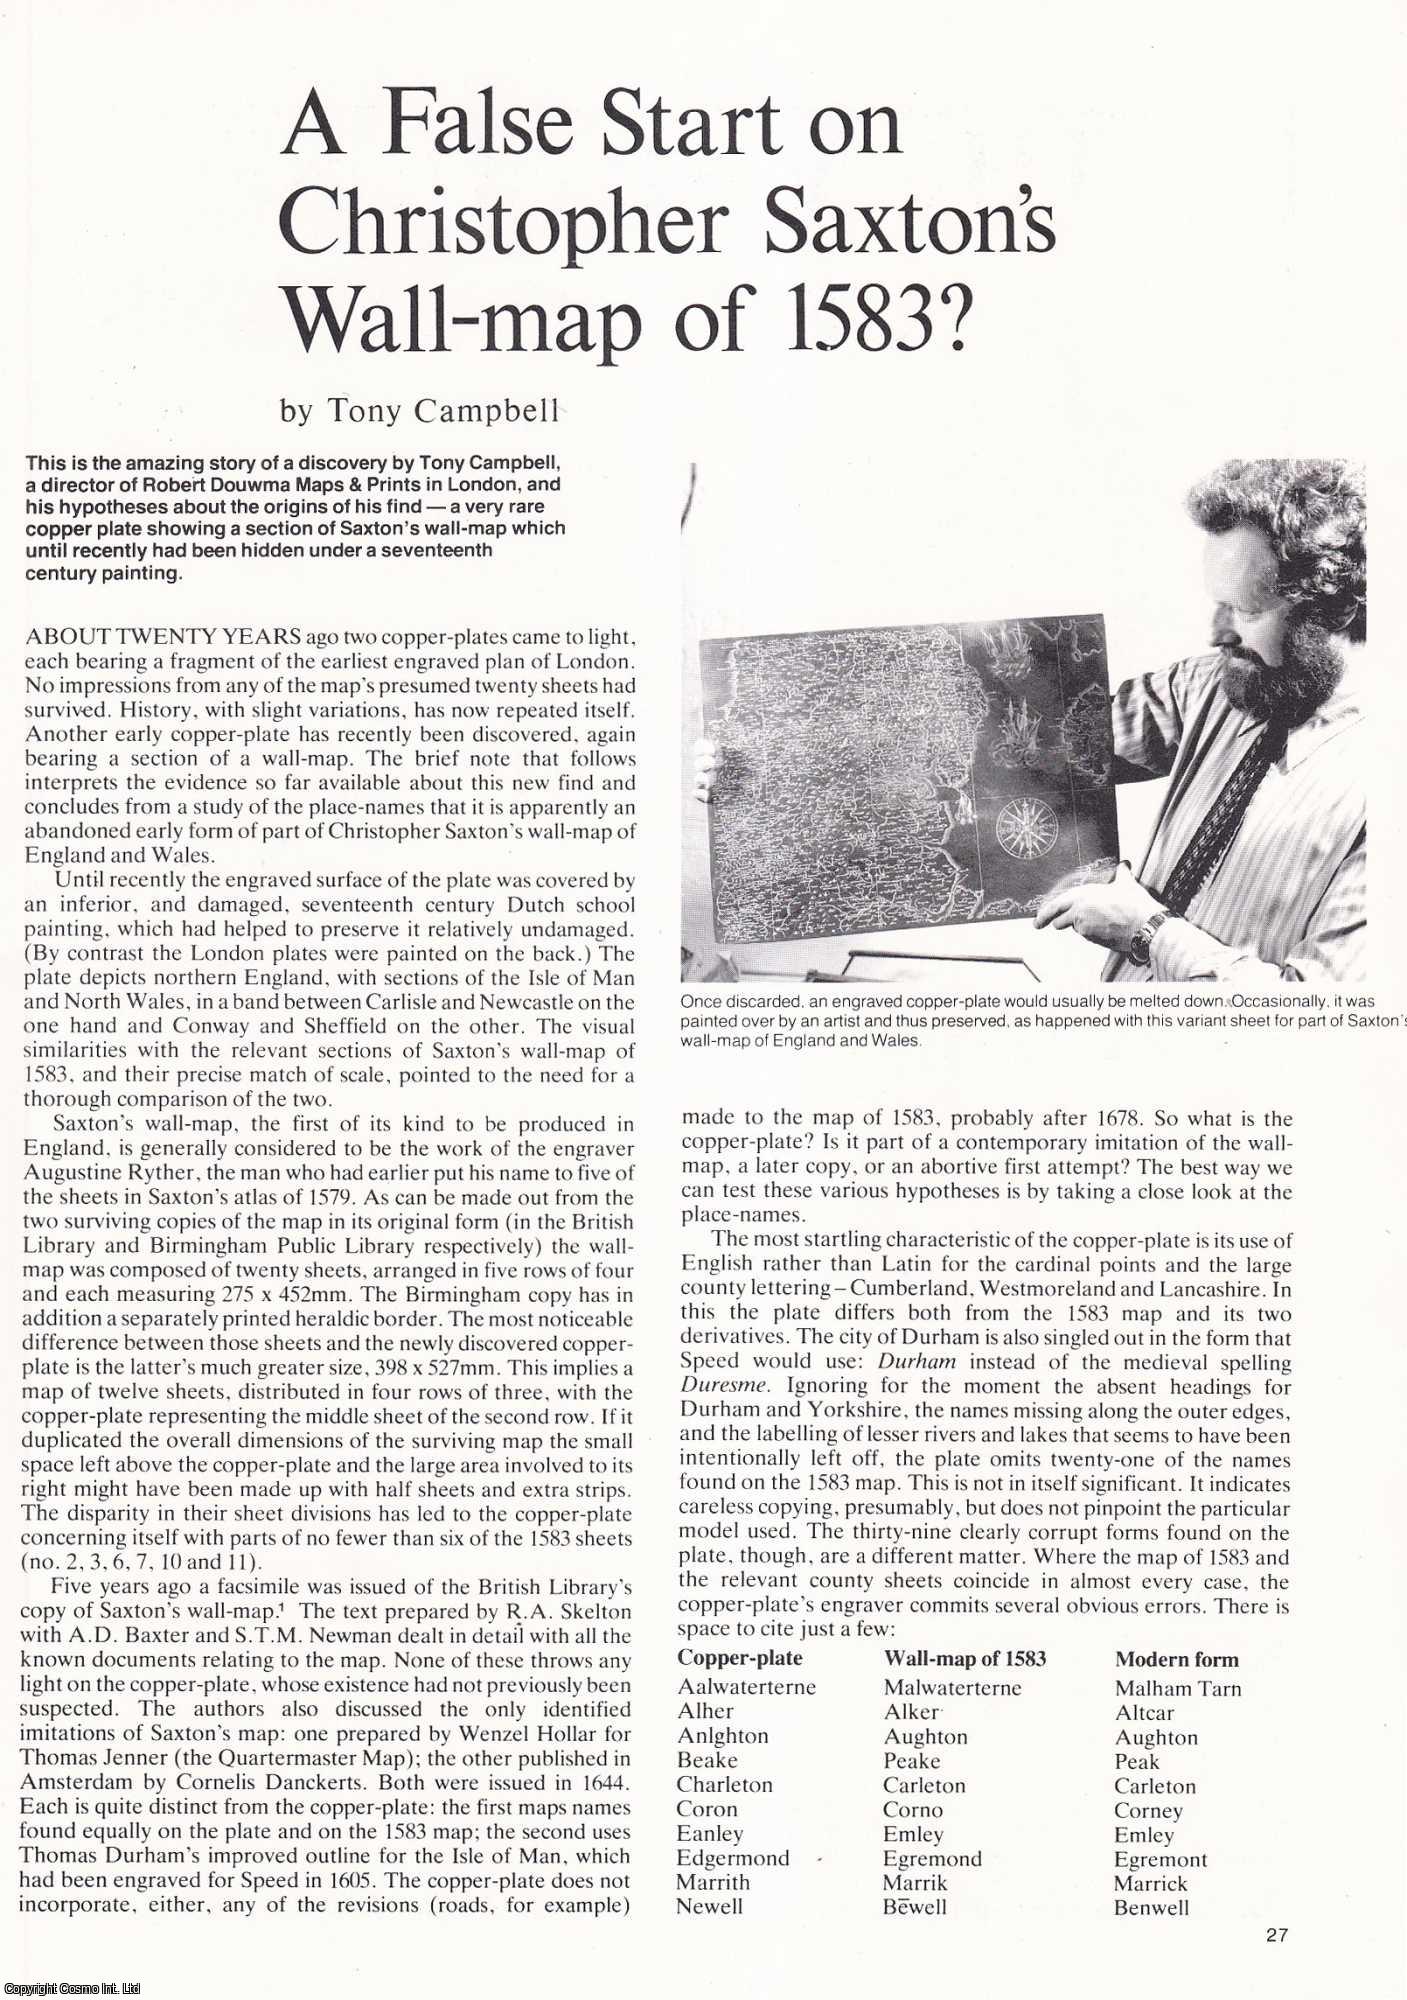 Tony Campbell - Christopher Saxton's Wall-Map of 1583: the Discovery of a Rare Copper Plate under a Seventeenth Century Painting. An original article from Map Collector Magazine, 1979.